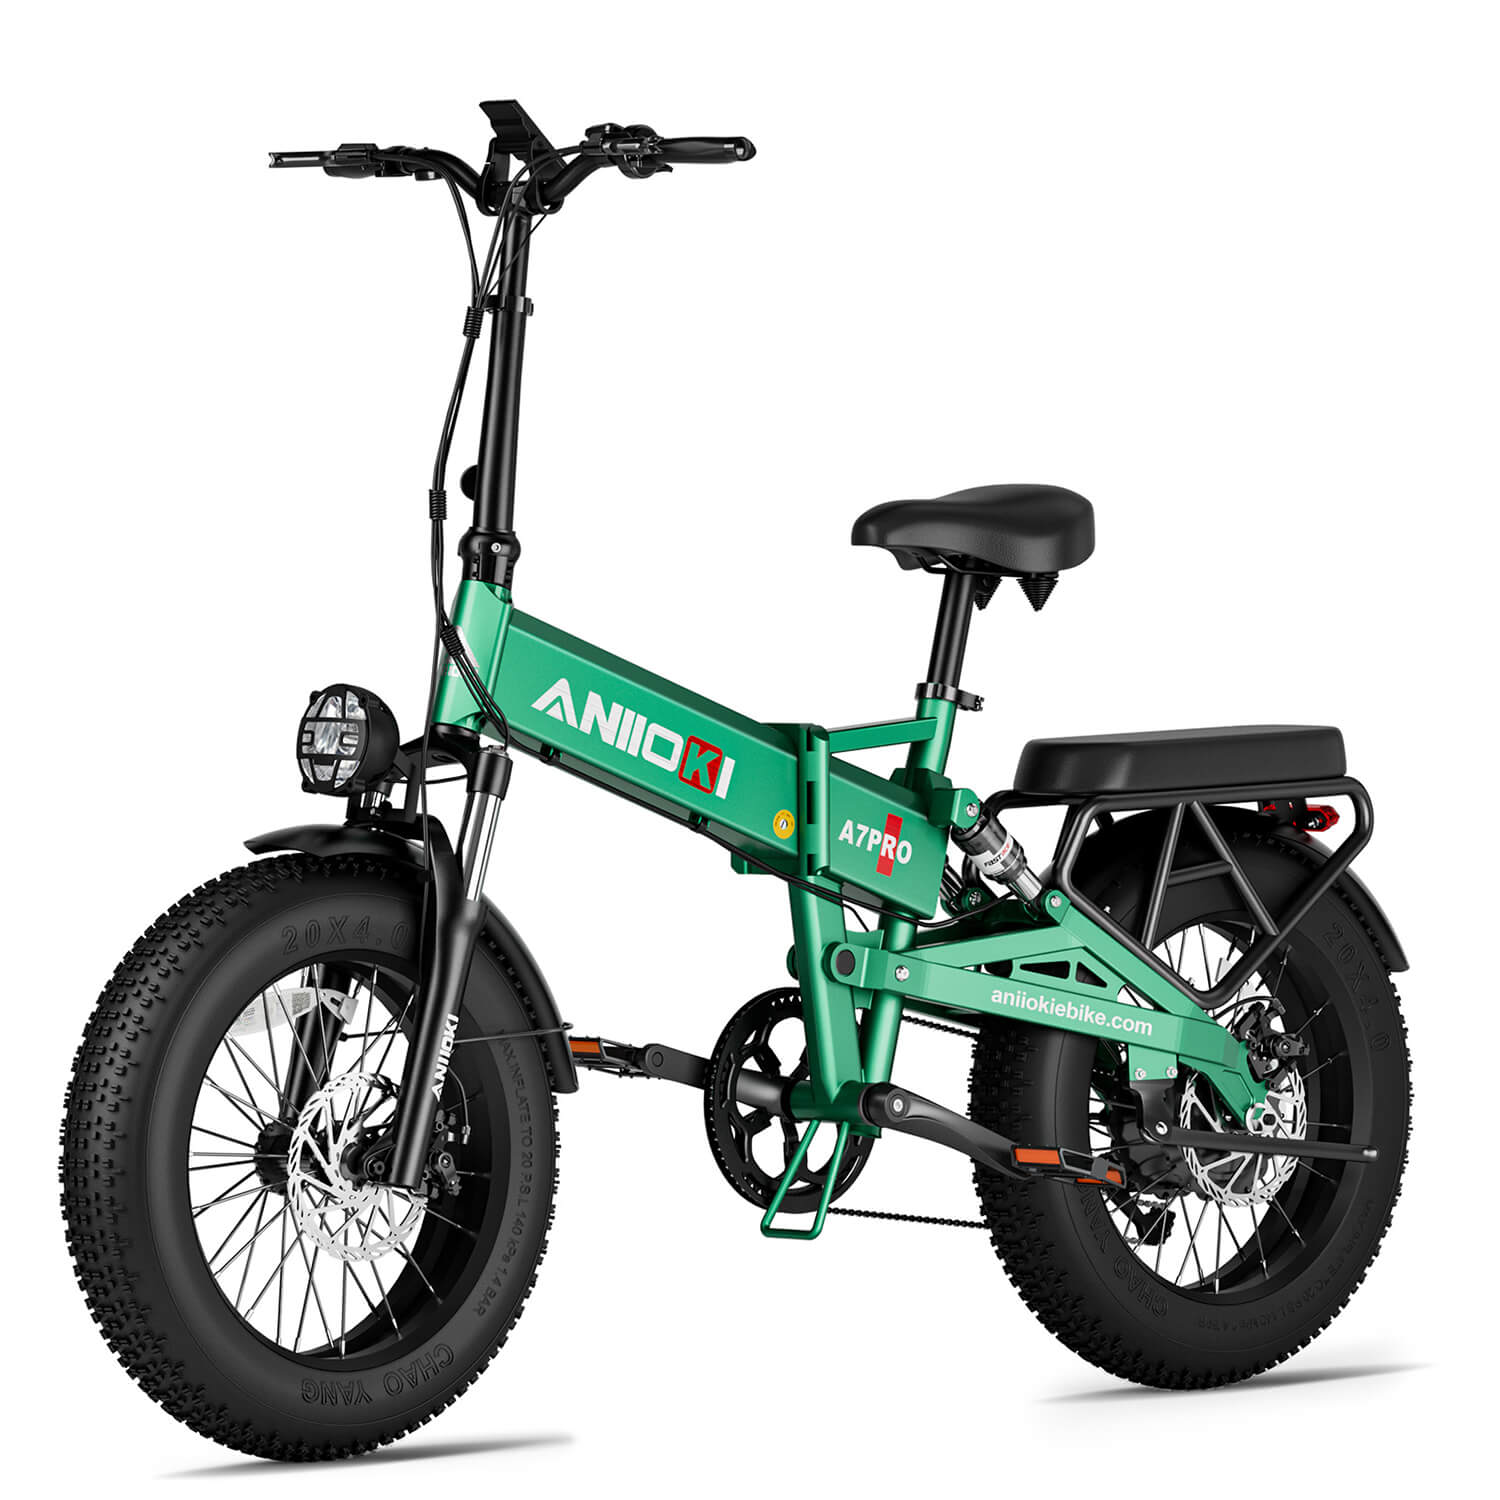 The Wallke A7-PRO is the king of e-bikes - with long range and hill-climbing capabilities